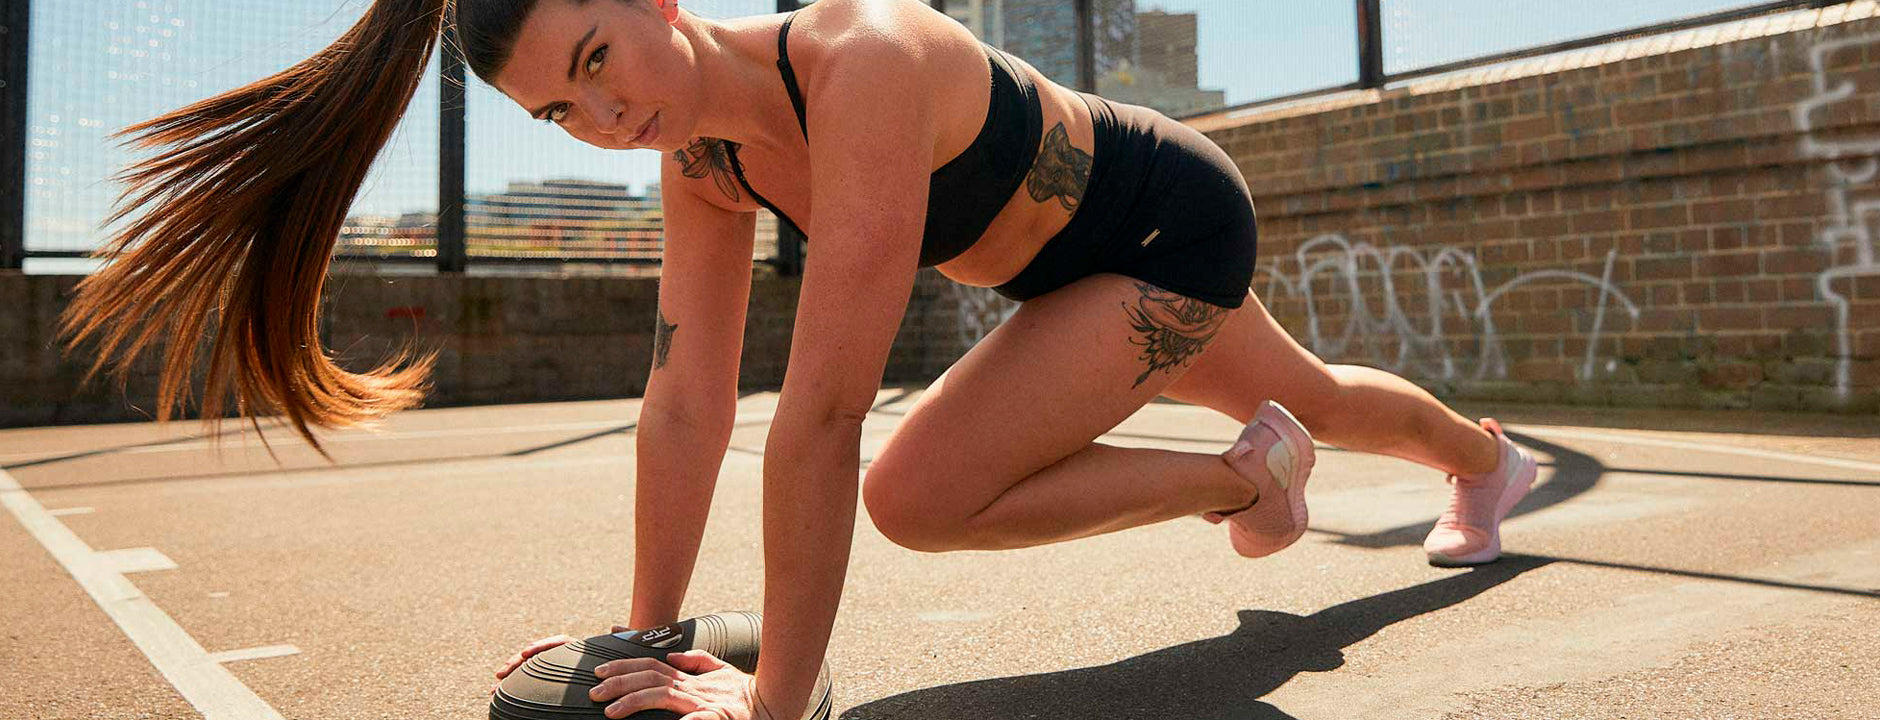 4 Places to Workout That Aren’t the Gym